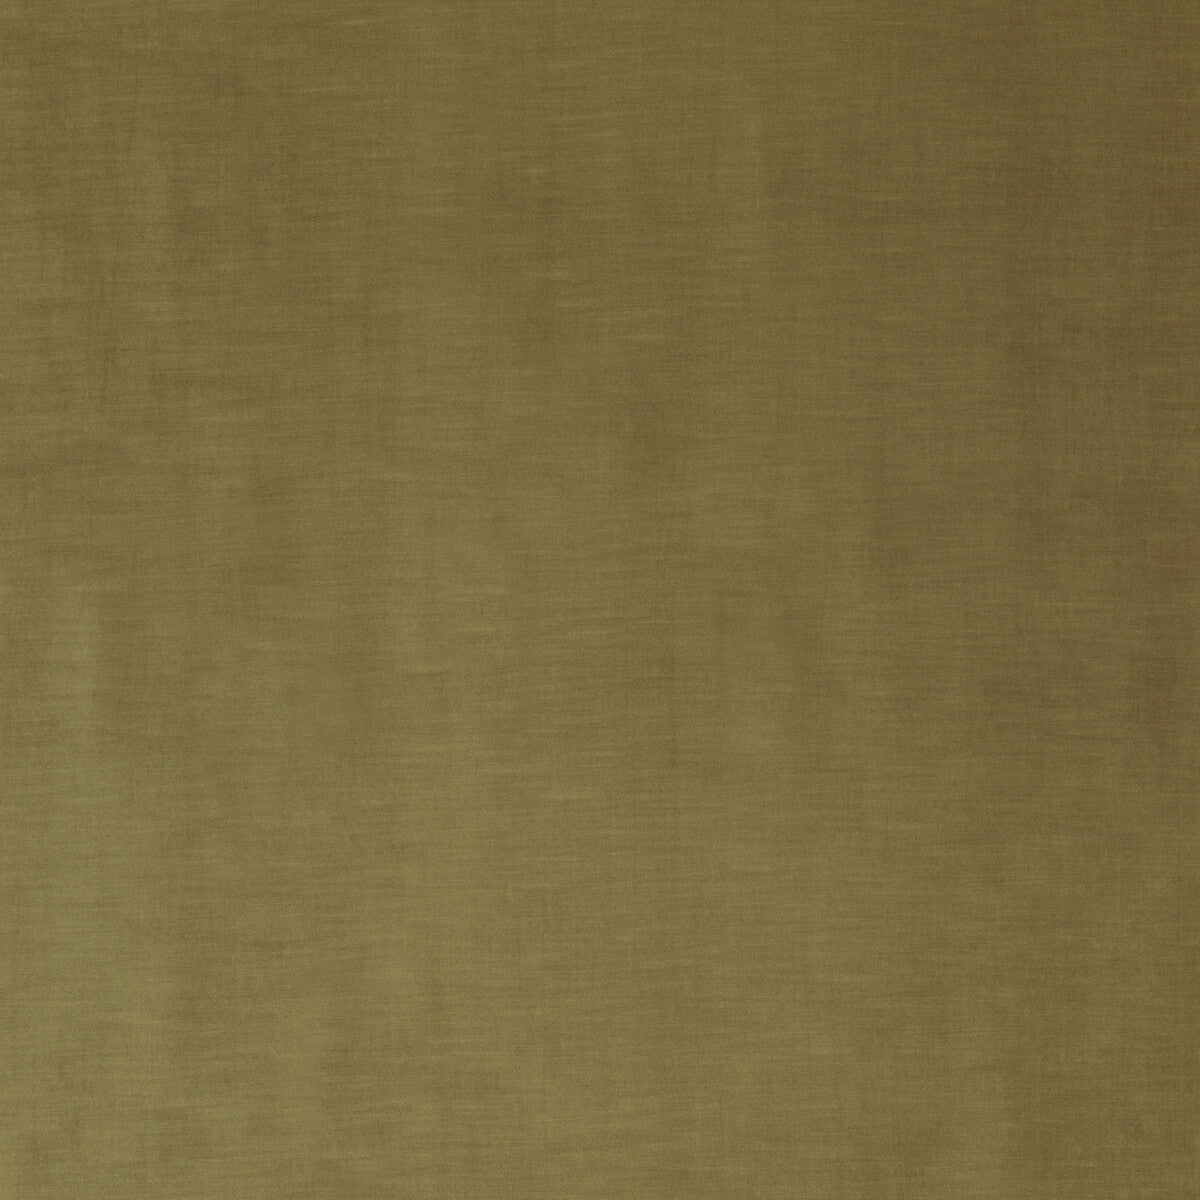 Coniston Velvet fabric in bronze color - pattern BF10781.850.0 - by G P &amp; J Baker in the Coniston Velvet collection